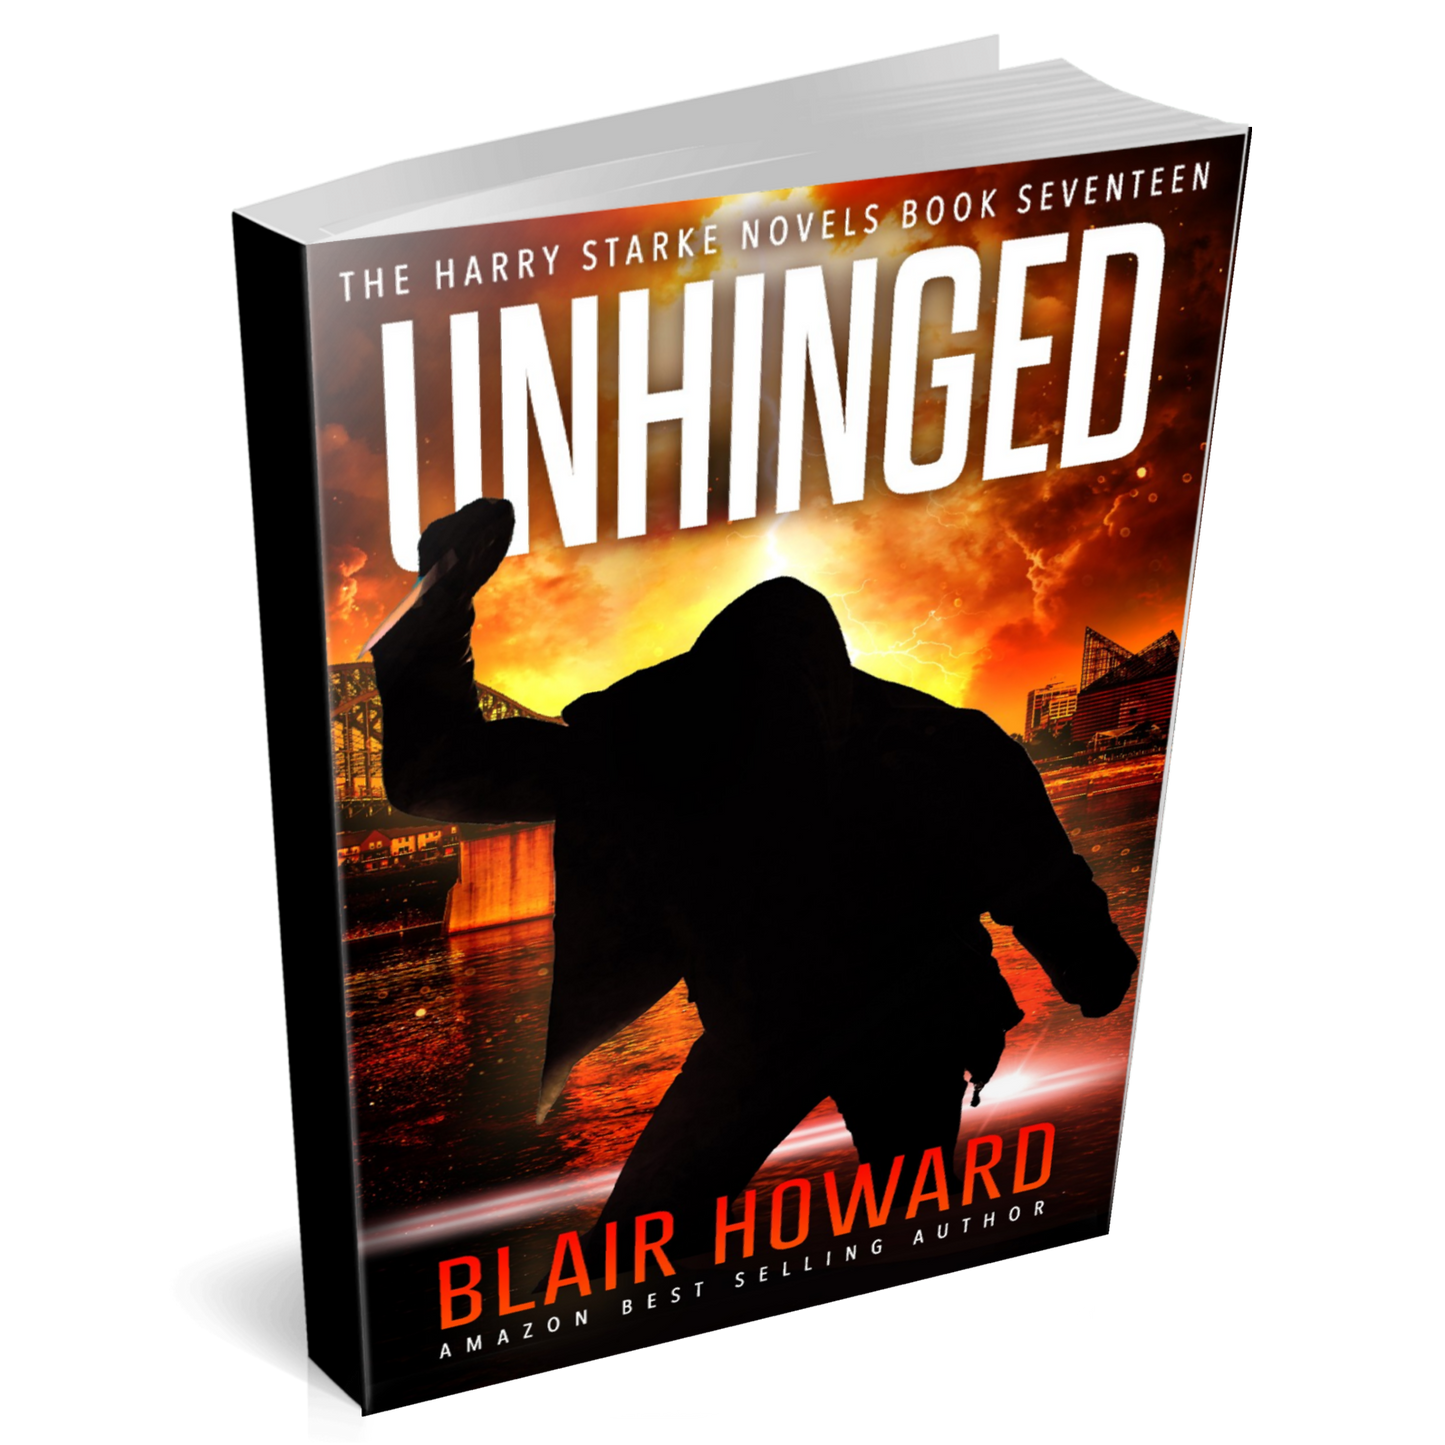 Deal 1-Unhinged (The Harry Starke Novels Book 17)